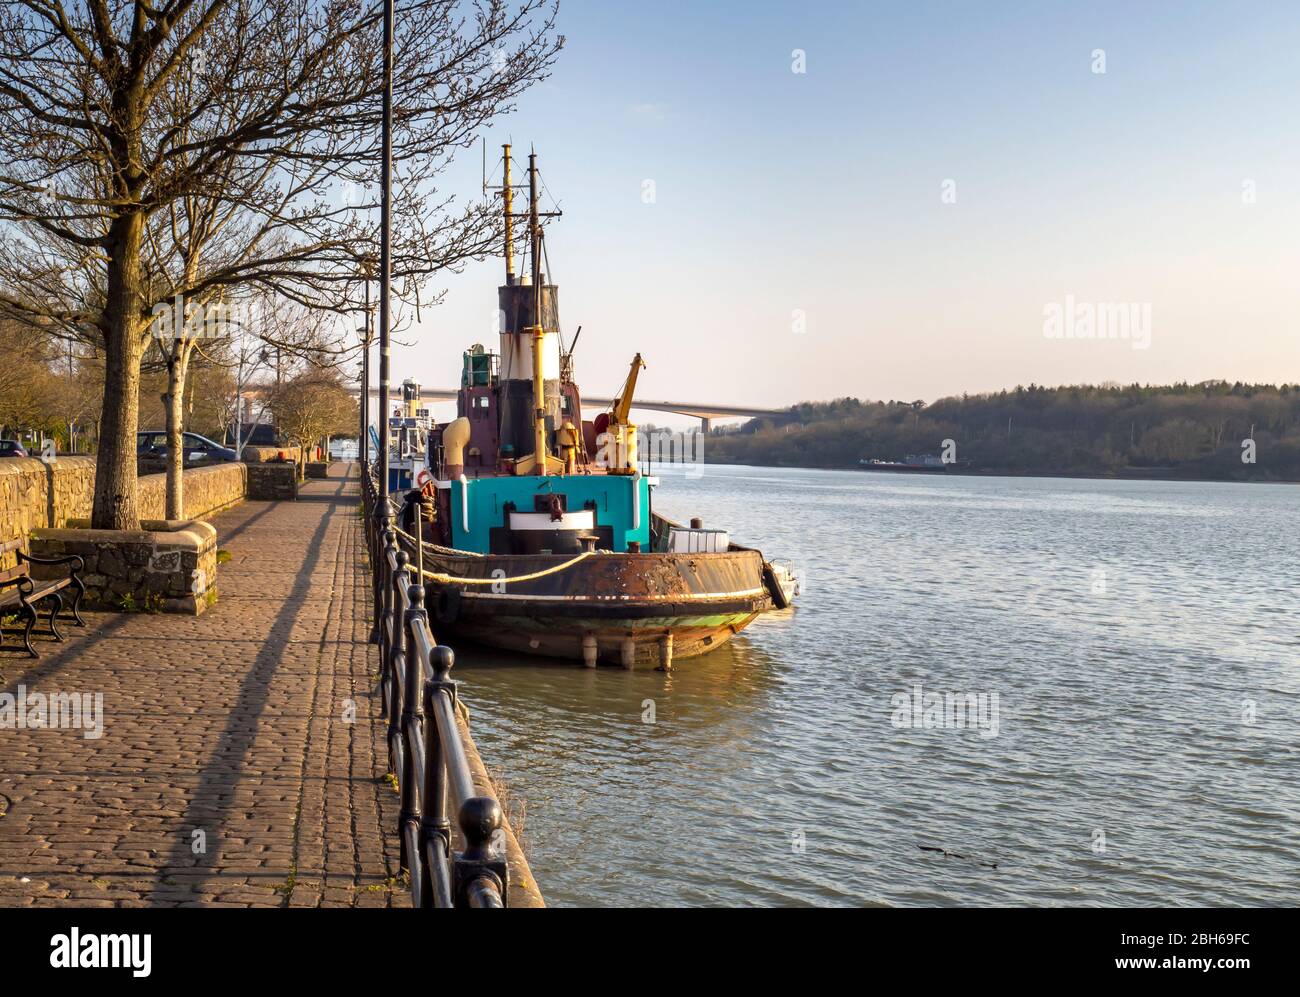 BIDEFORD, NORTH DEVON, ENGLAND, UK - MARCH 28 2020: Old boat, maybe tug, moored on the quay in this small, historic harbour town. Spring sunshine. Stock Photo